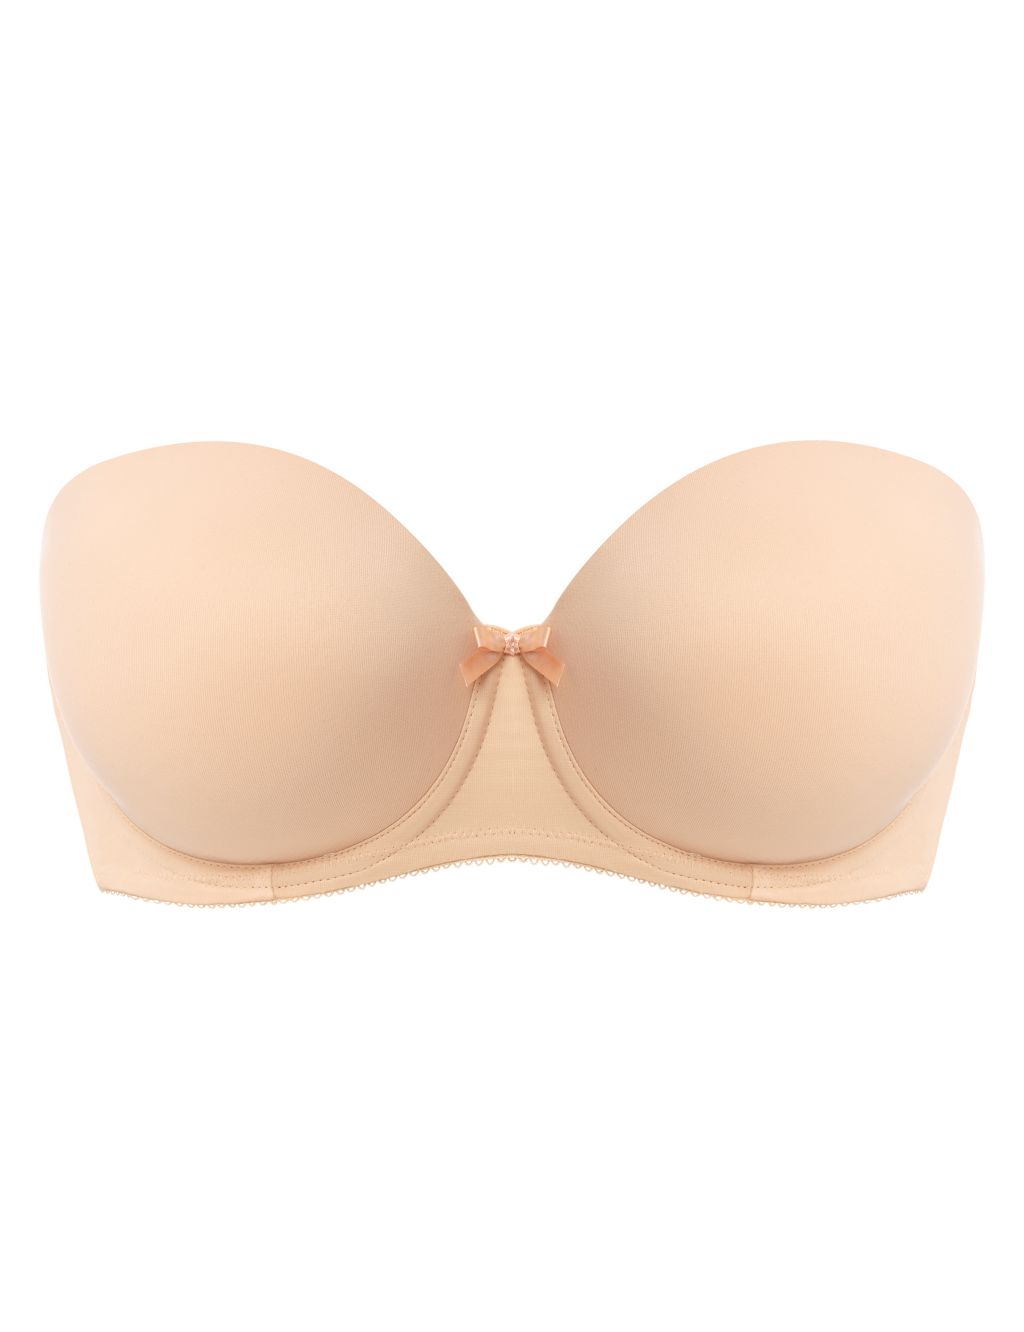 Deco Wired Strapless Moulded Bra B-GG image 2